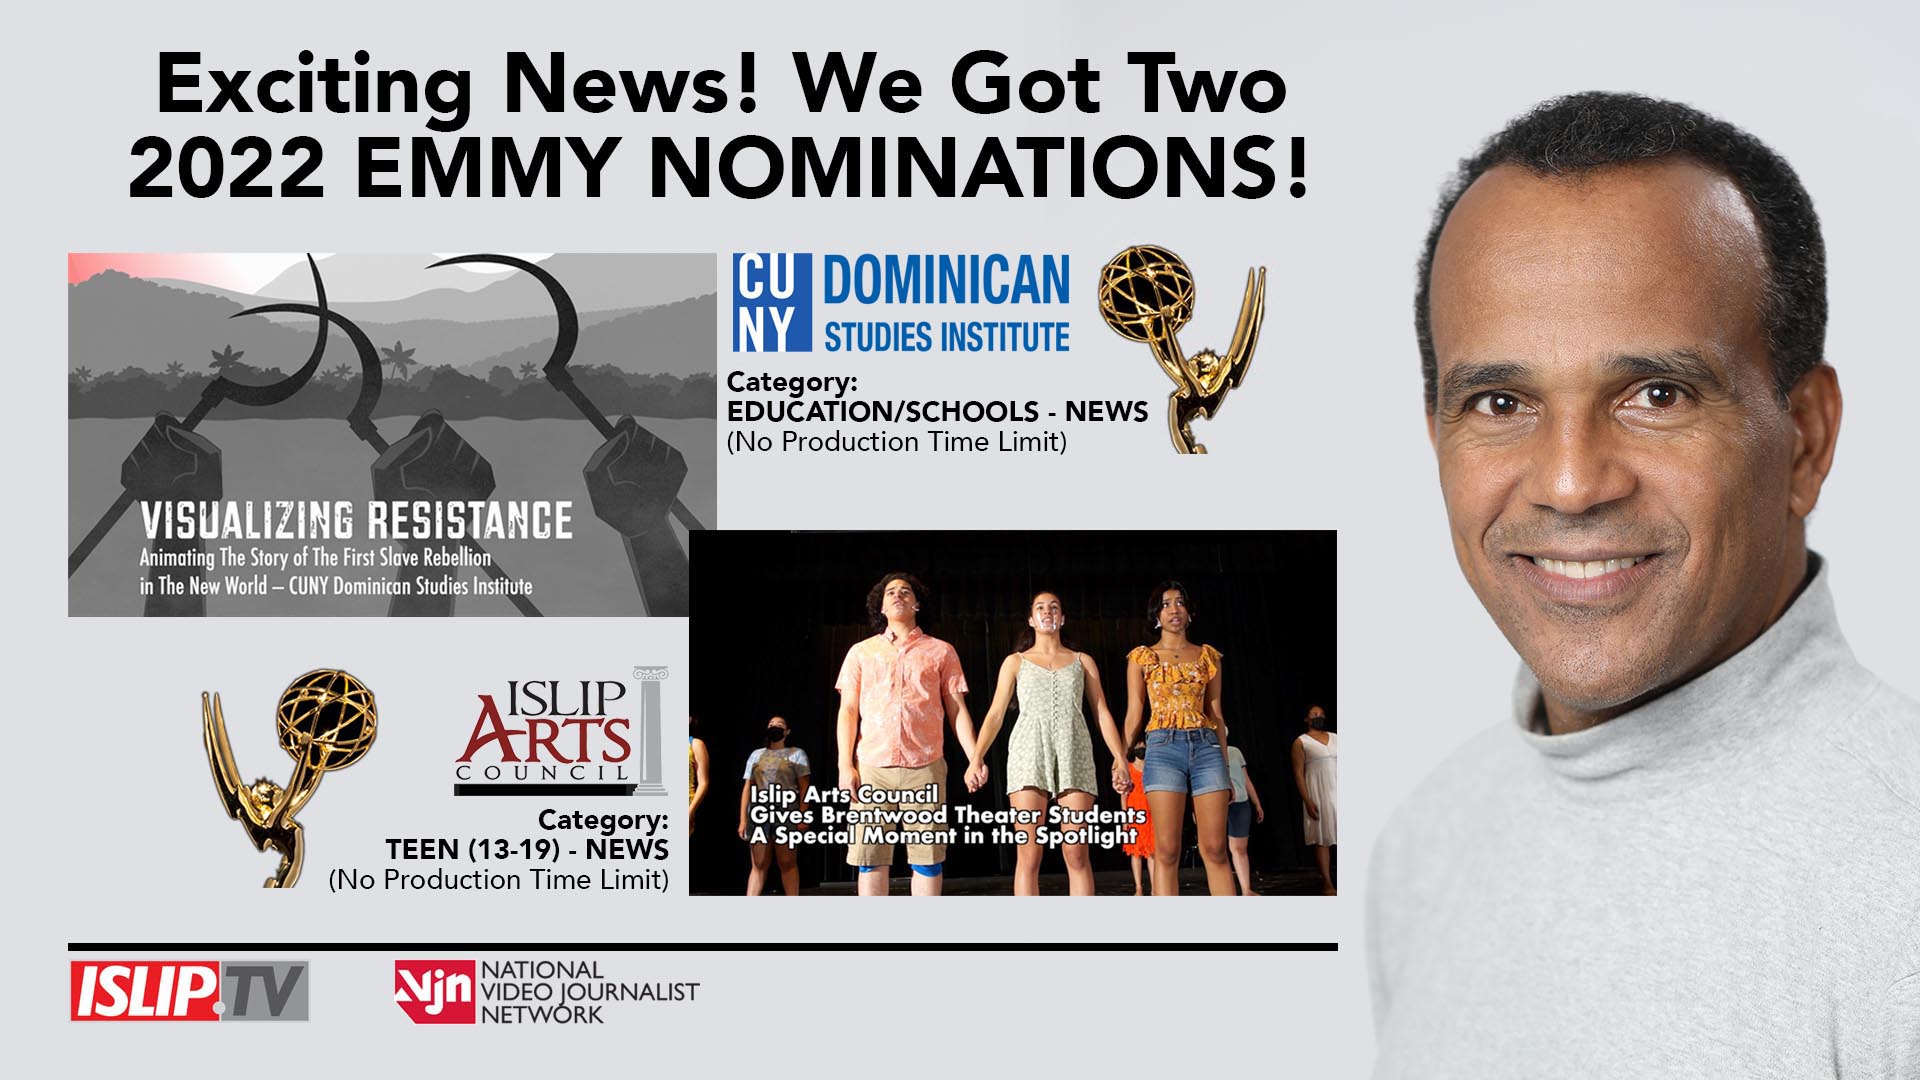 Two NY EMMY® Nominations in 2022 for 'BROADWAY AND MAIN' Publisher Islip TV